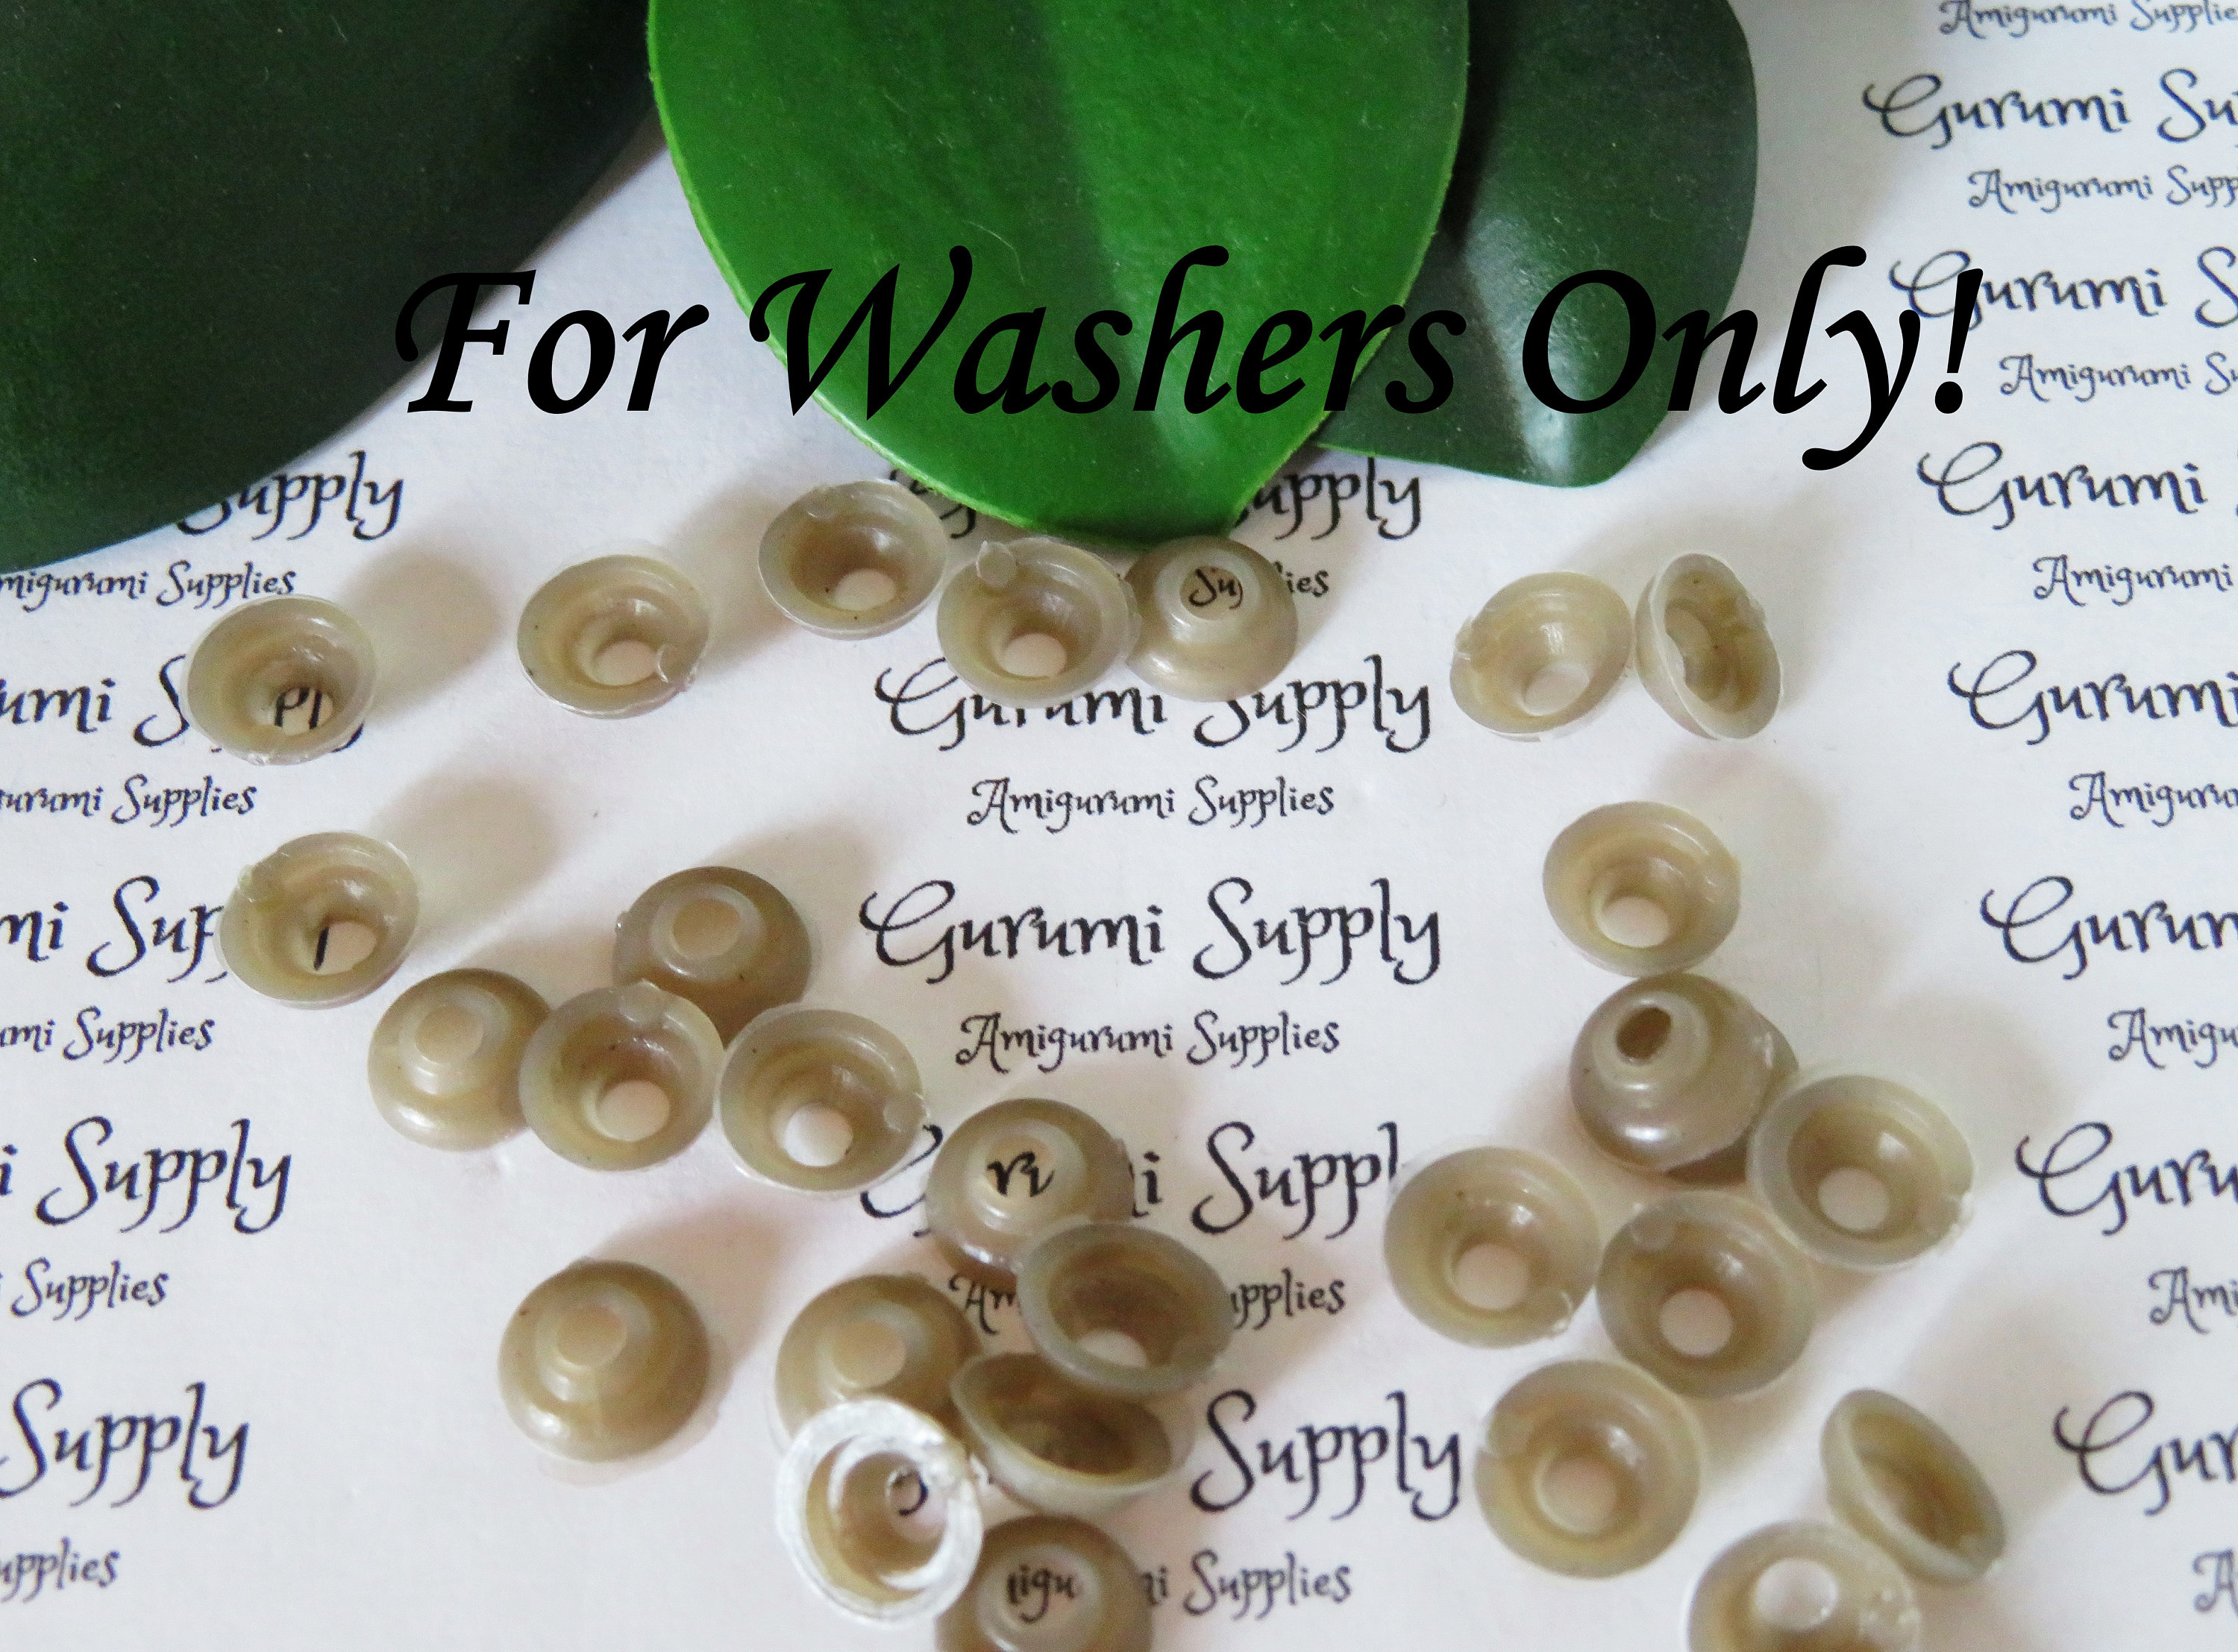 Soft Washers - Small - 50 Count - Safety Eyes - Amigurumi - Animal Eyes -  Craft Supplies - Replacement Washers - Crochet - Knit - Felting